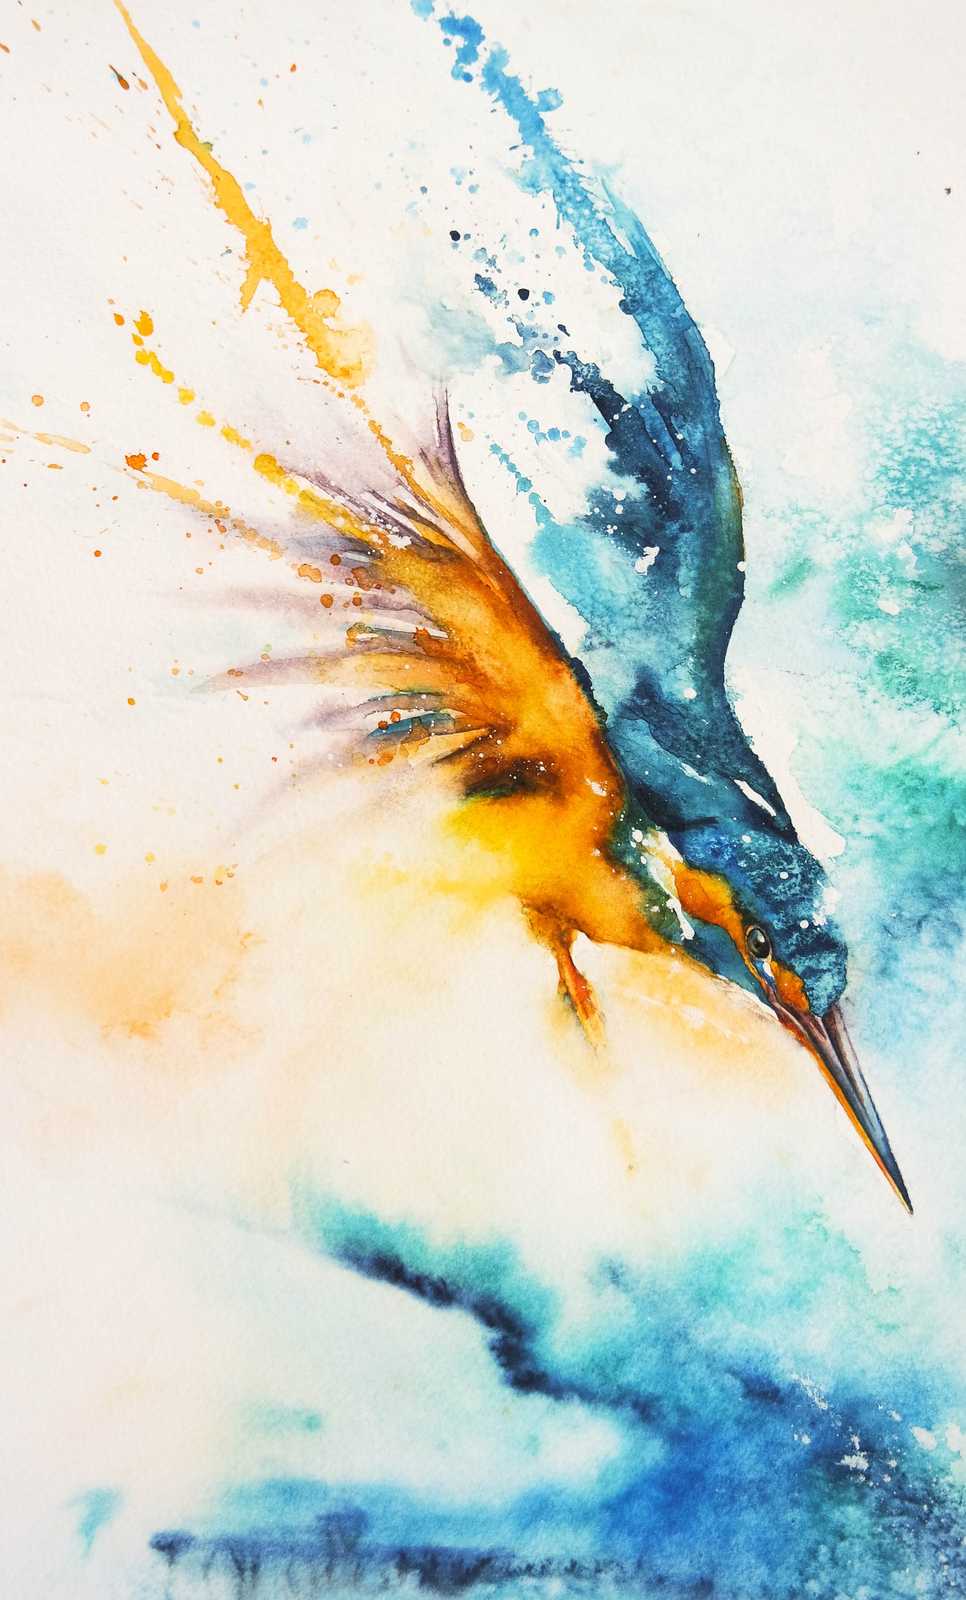 ***NEW*** A flash of blue and gold ( kingfisher )